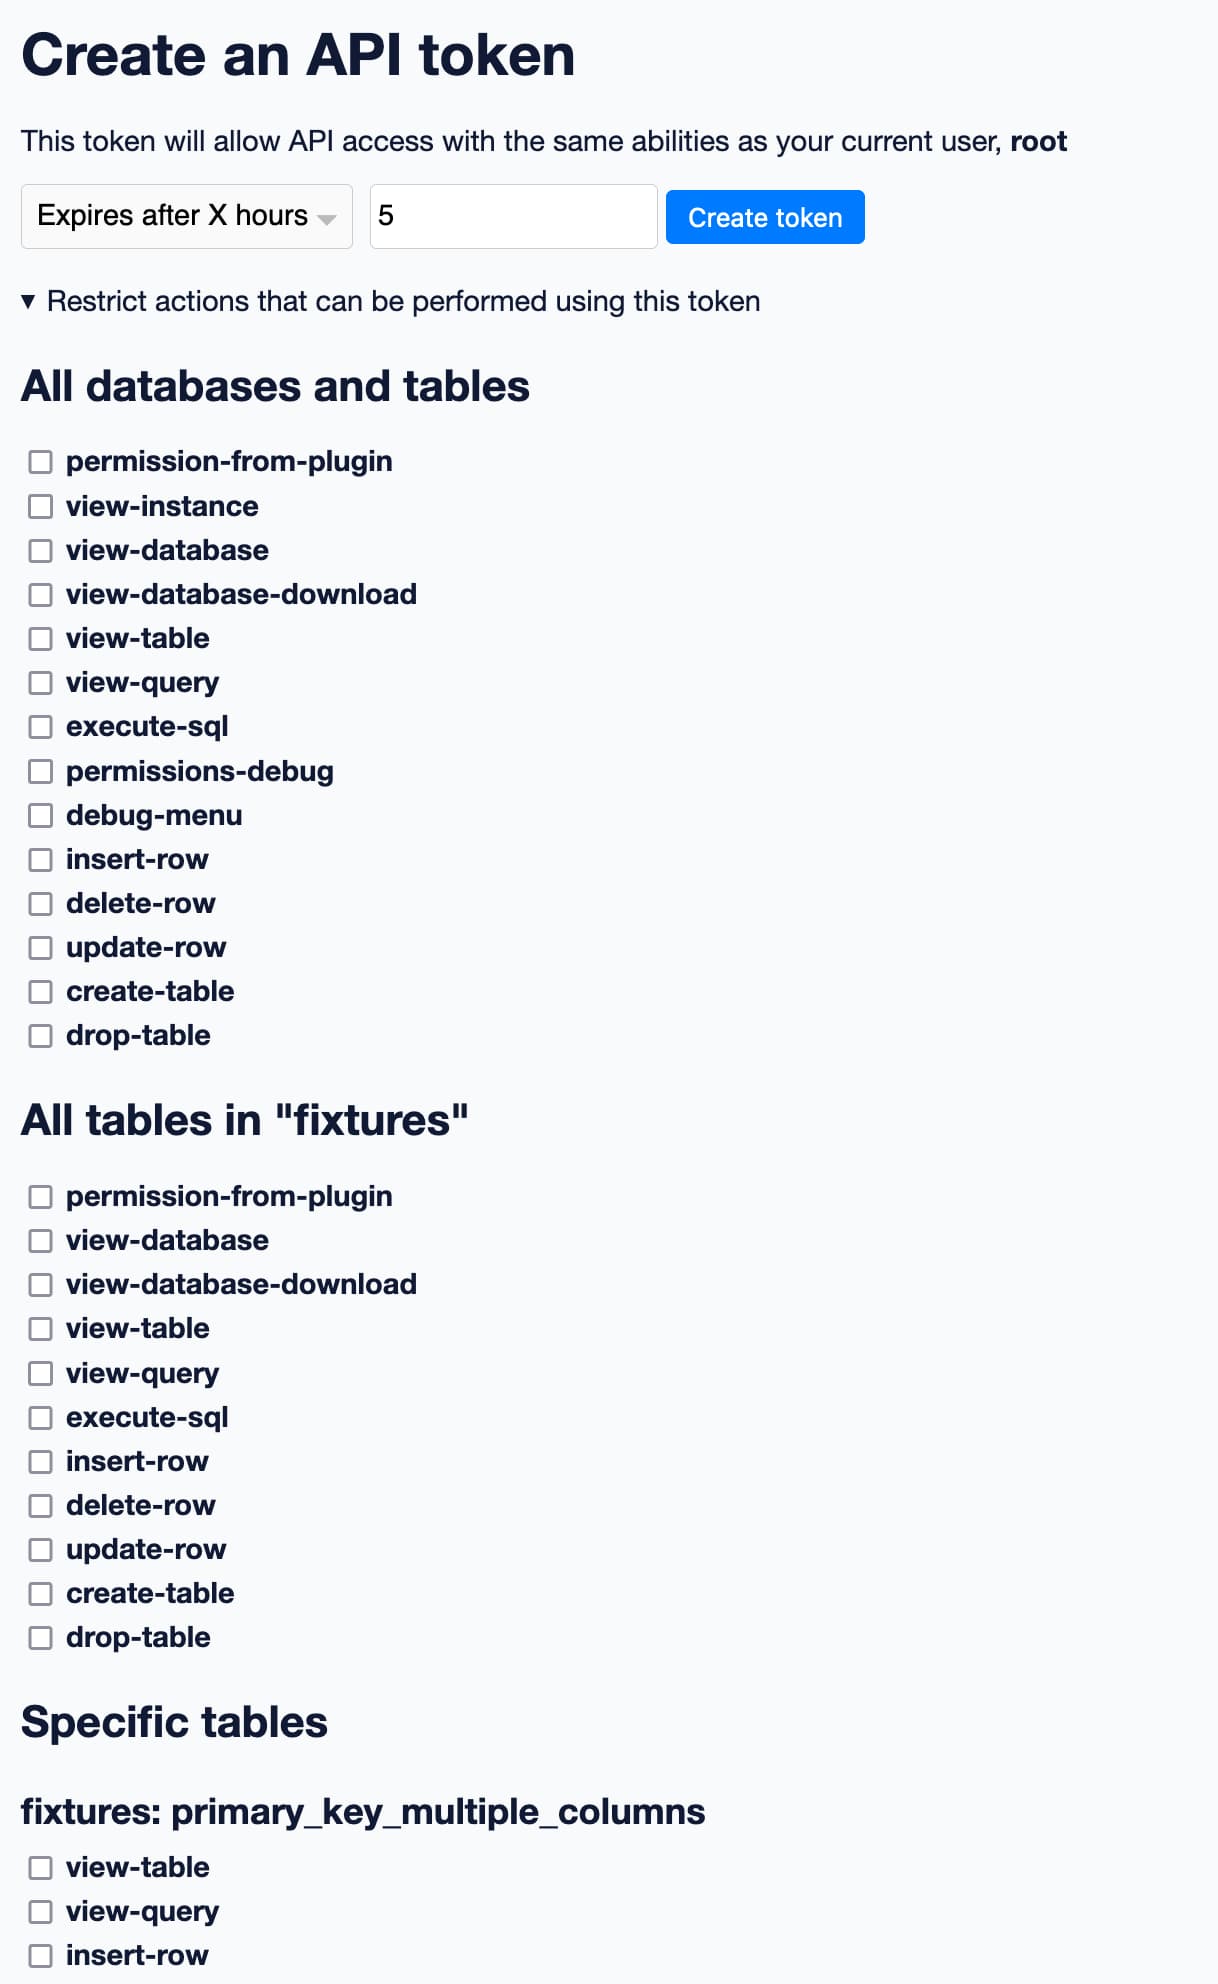 Create an API token. This token will allow API access with the same abilities as your current user, root. Form lets you select Expires after X hours, 5 - and there's an expanded menu item for Restrict actions that can be performed using this token. Below that are lists of checkboxes - the first is for All databases and tables, with a list of every permission known to Datasette. Next is All tables in fixtures, which lists just permissions that make sense for a specific database. Finally is Specific tables, which lists fixtures: primary_key_multiple_columns with a much shorter list of permissions that can apply just to tables.